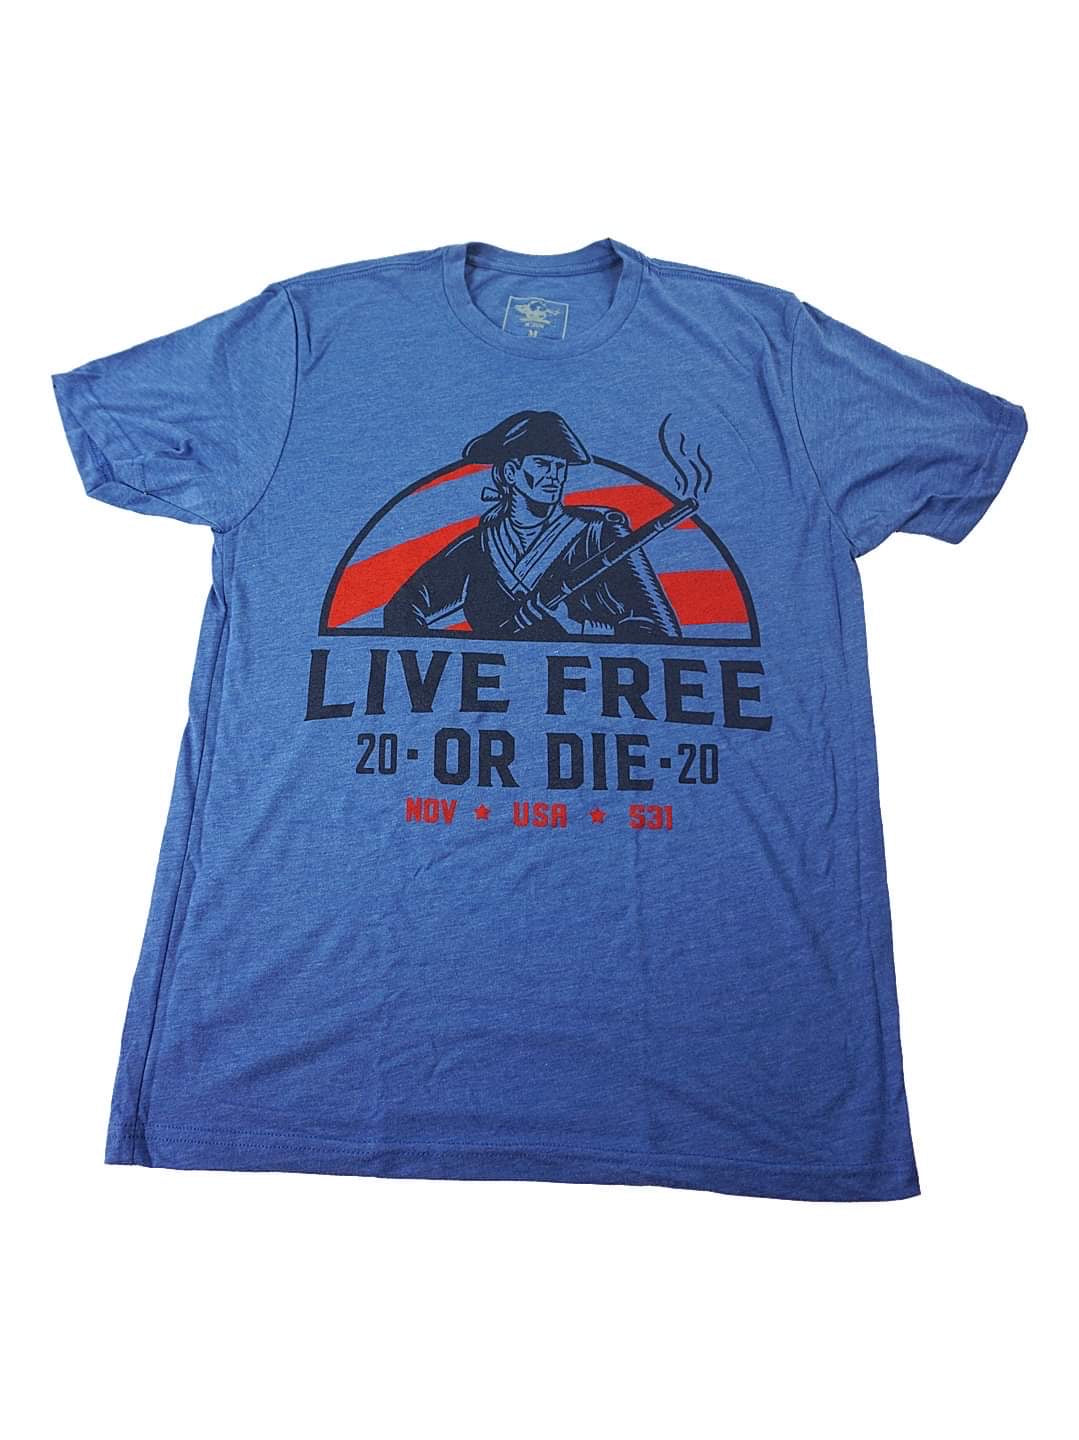 Limited Edition - Live Free Shirt - Patriot blue